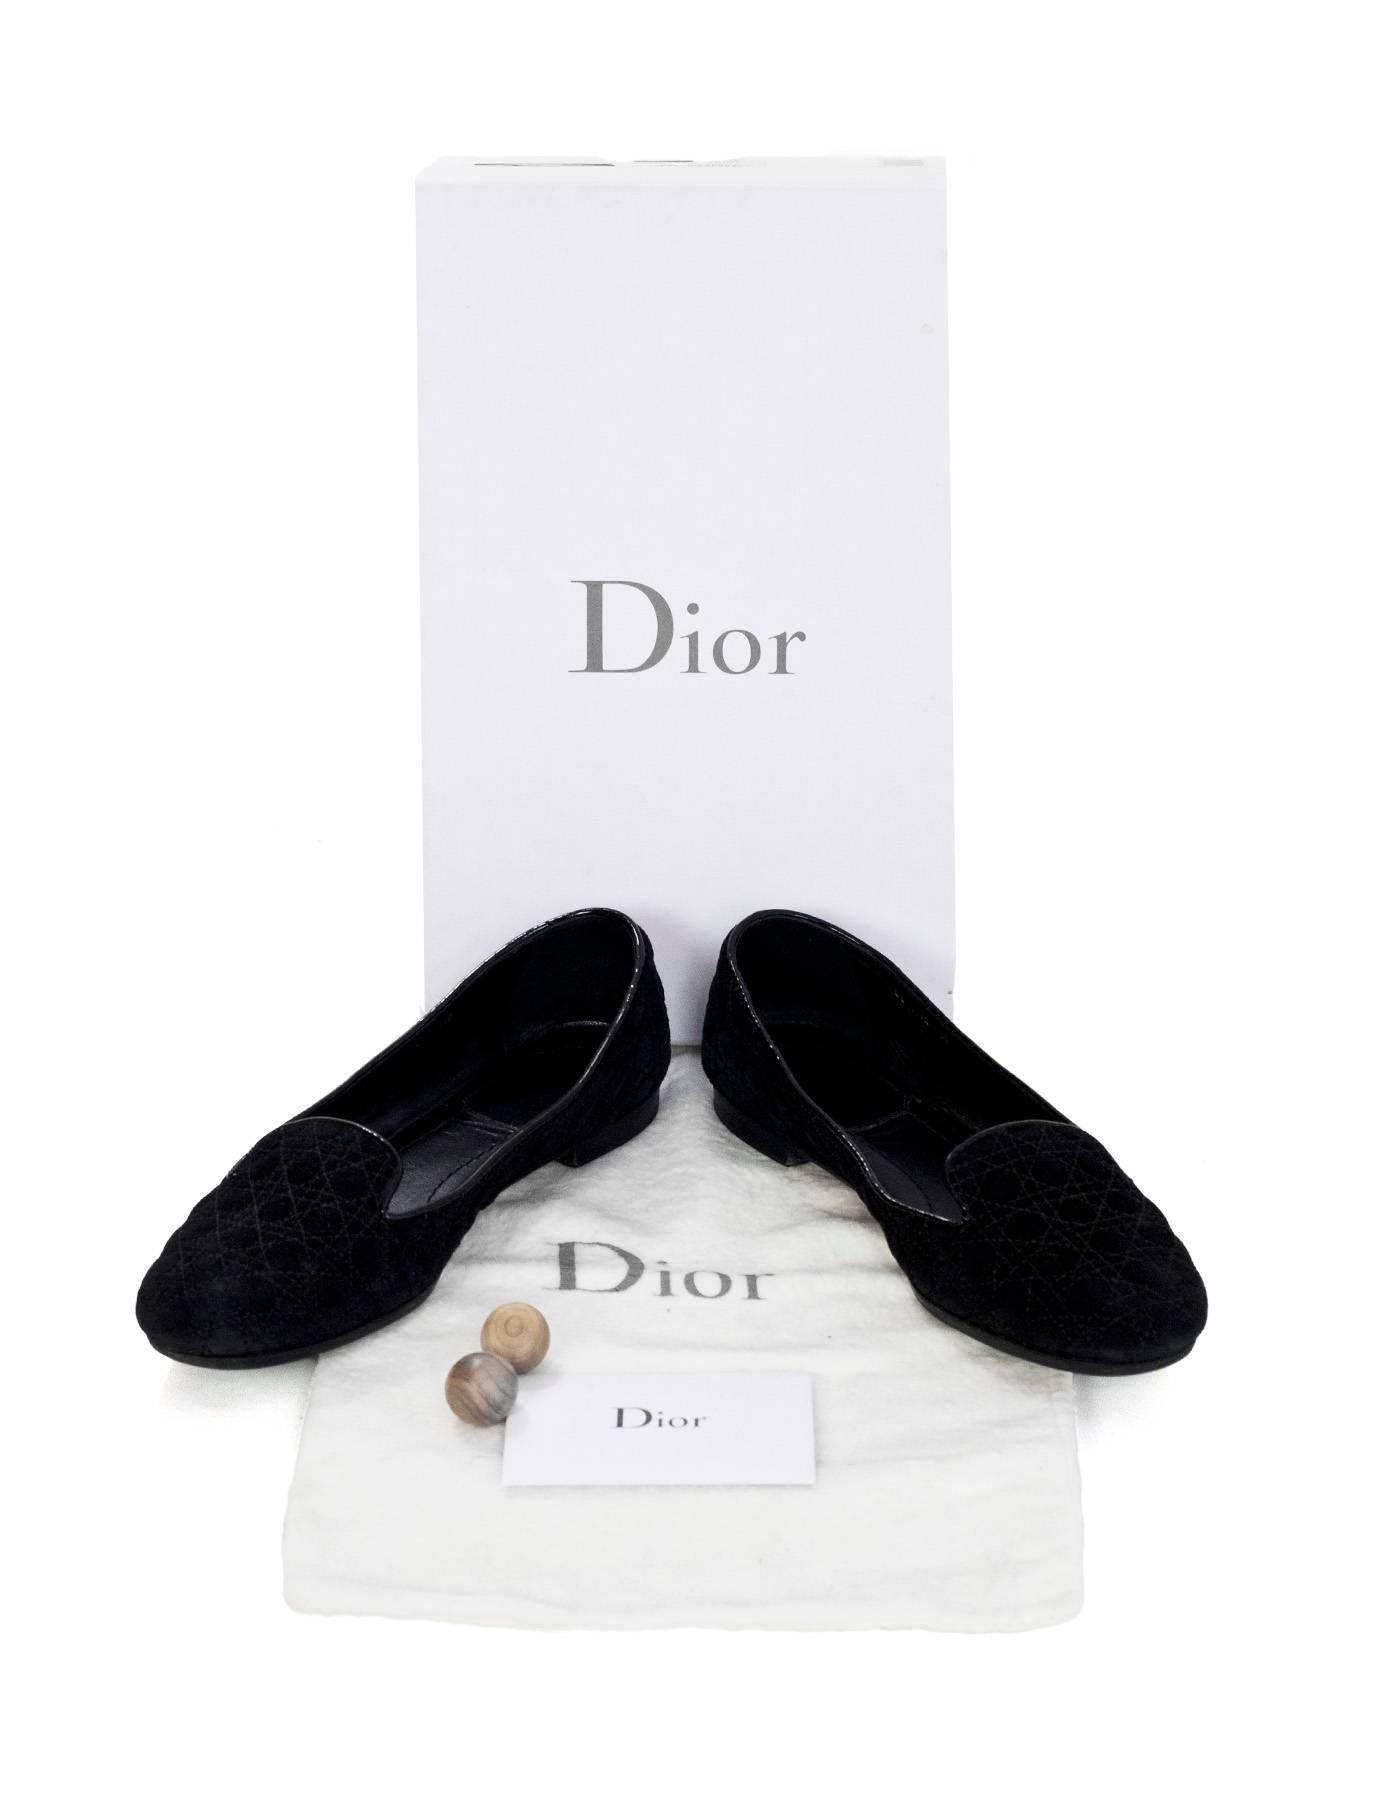 Christian Dior Black Suede Quilted Loafers Sz 35 rt. $610 2